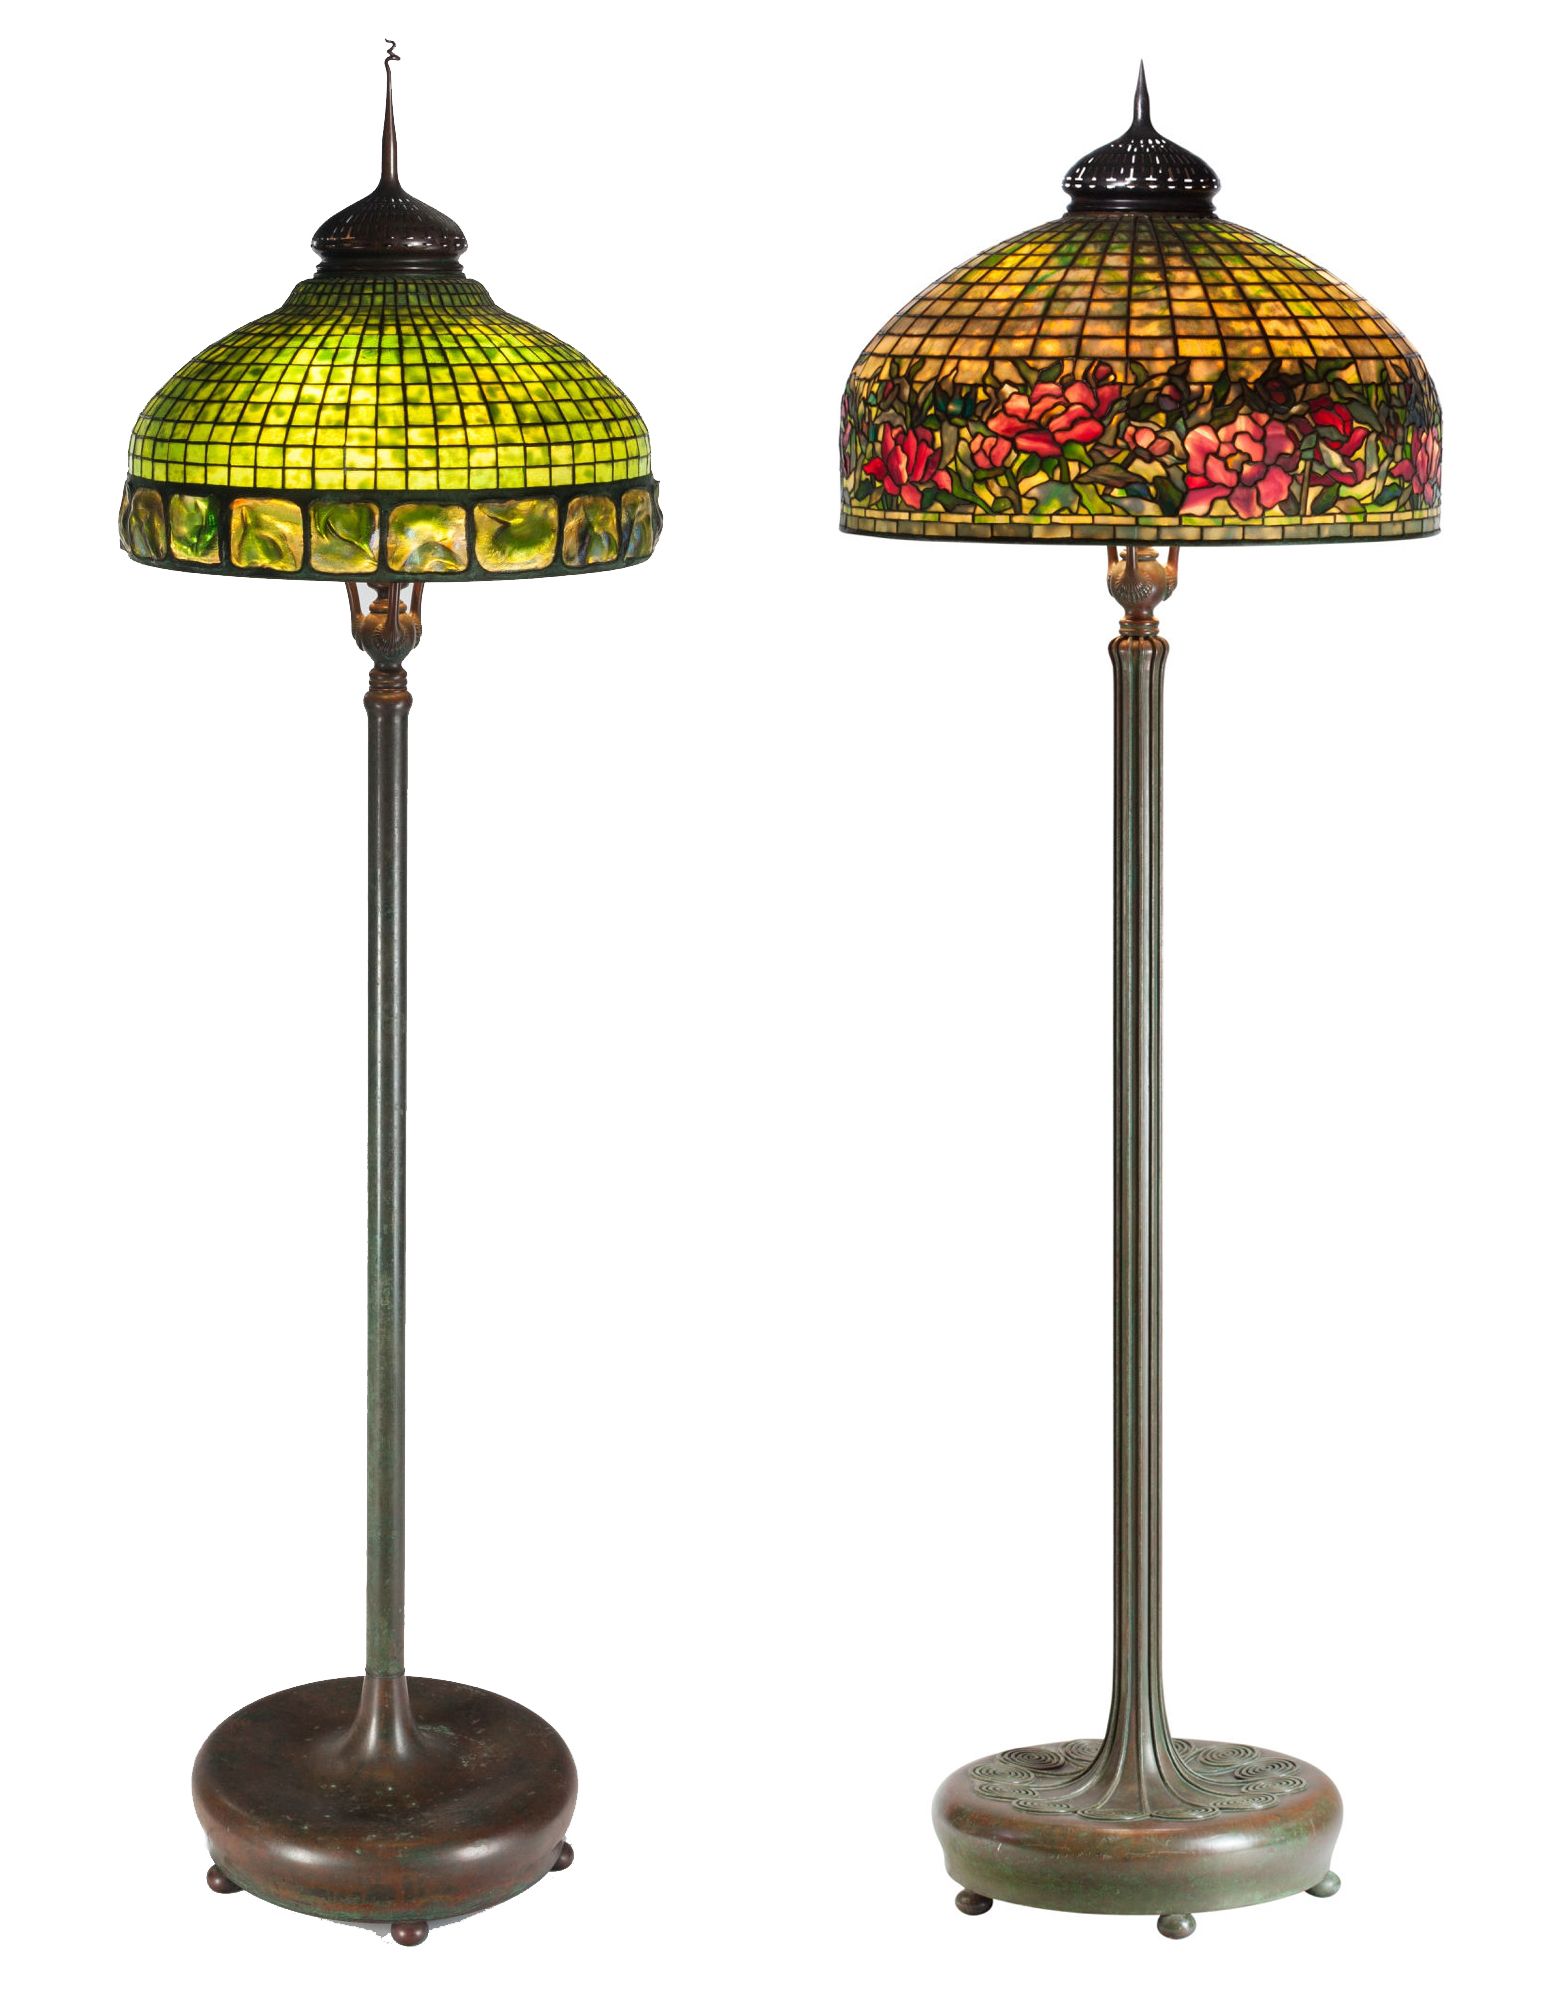 Tiffany, Gallé Lamps Shine On 1,800 Lot Heritage Auction June 19 21 With 74 Inch Floor Lamps (View 11 of 20)